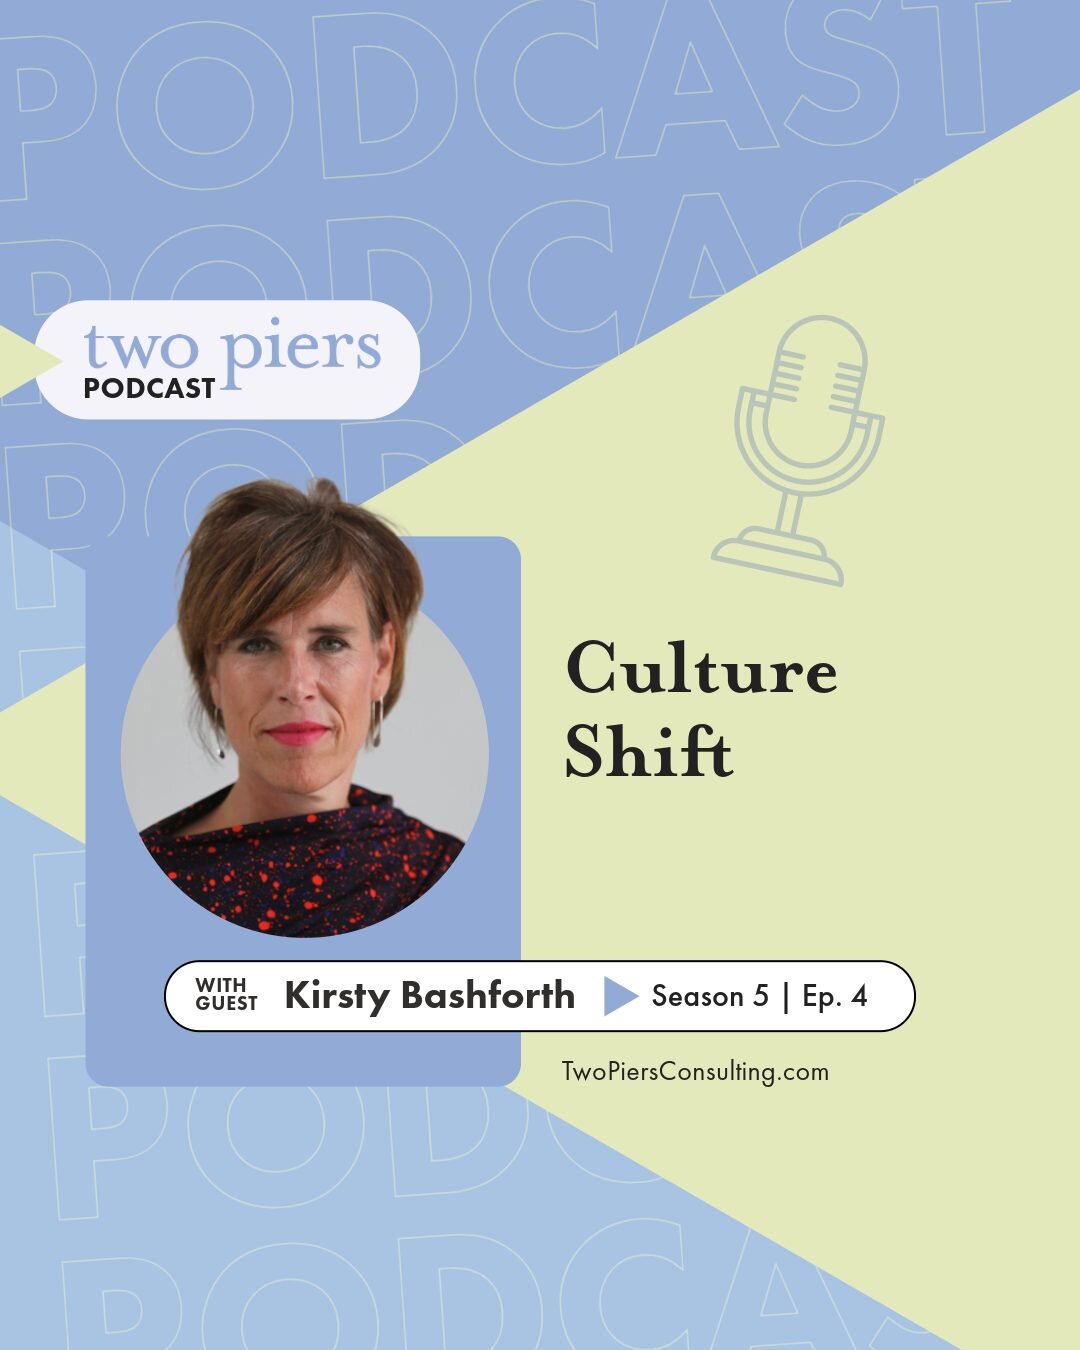 You know what they say... &quot;Culture eats strategy for breakfast&quot; 🥞 🍽 
We're joined by organizational change expert, author, and executive leader Kirsty Bashforth who uncovers the secrets of effective culture transformation.

She busts some